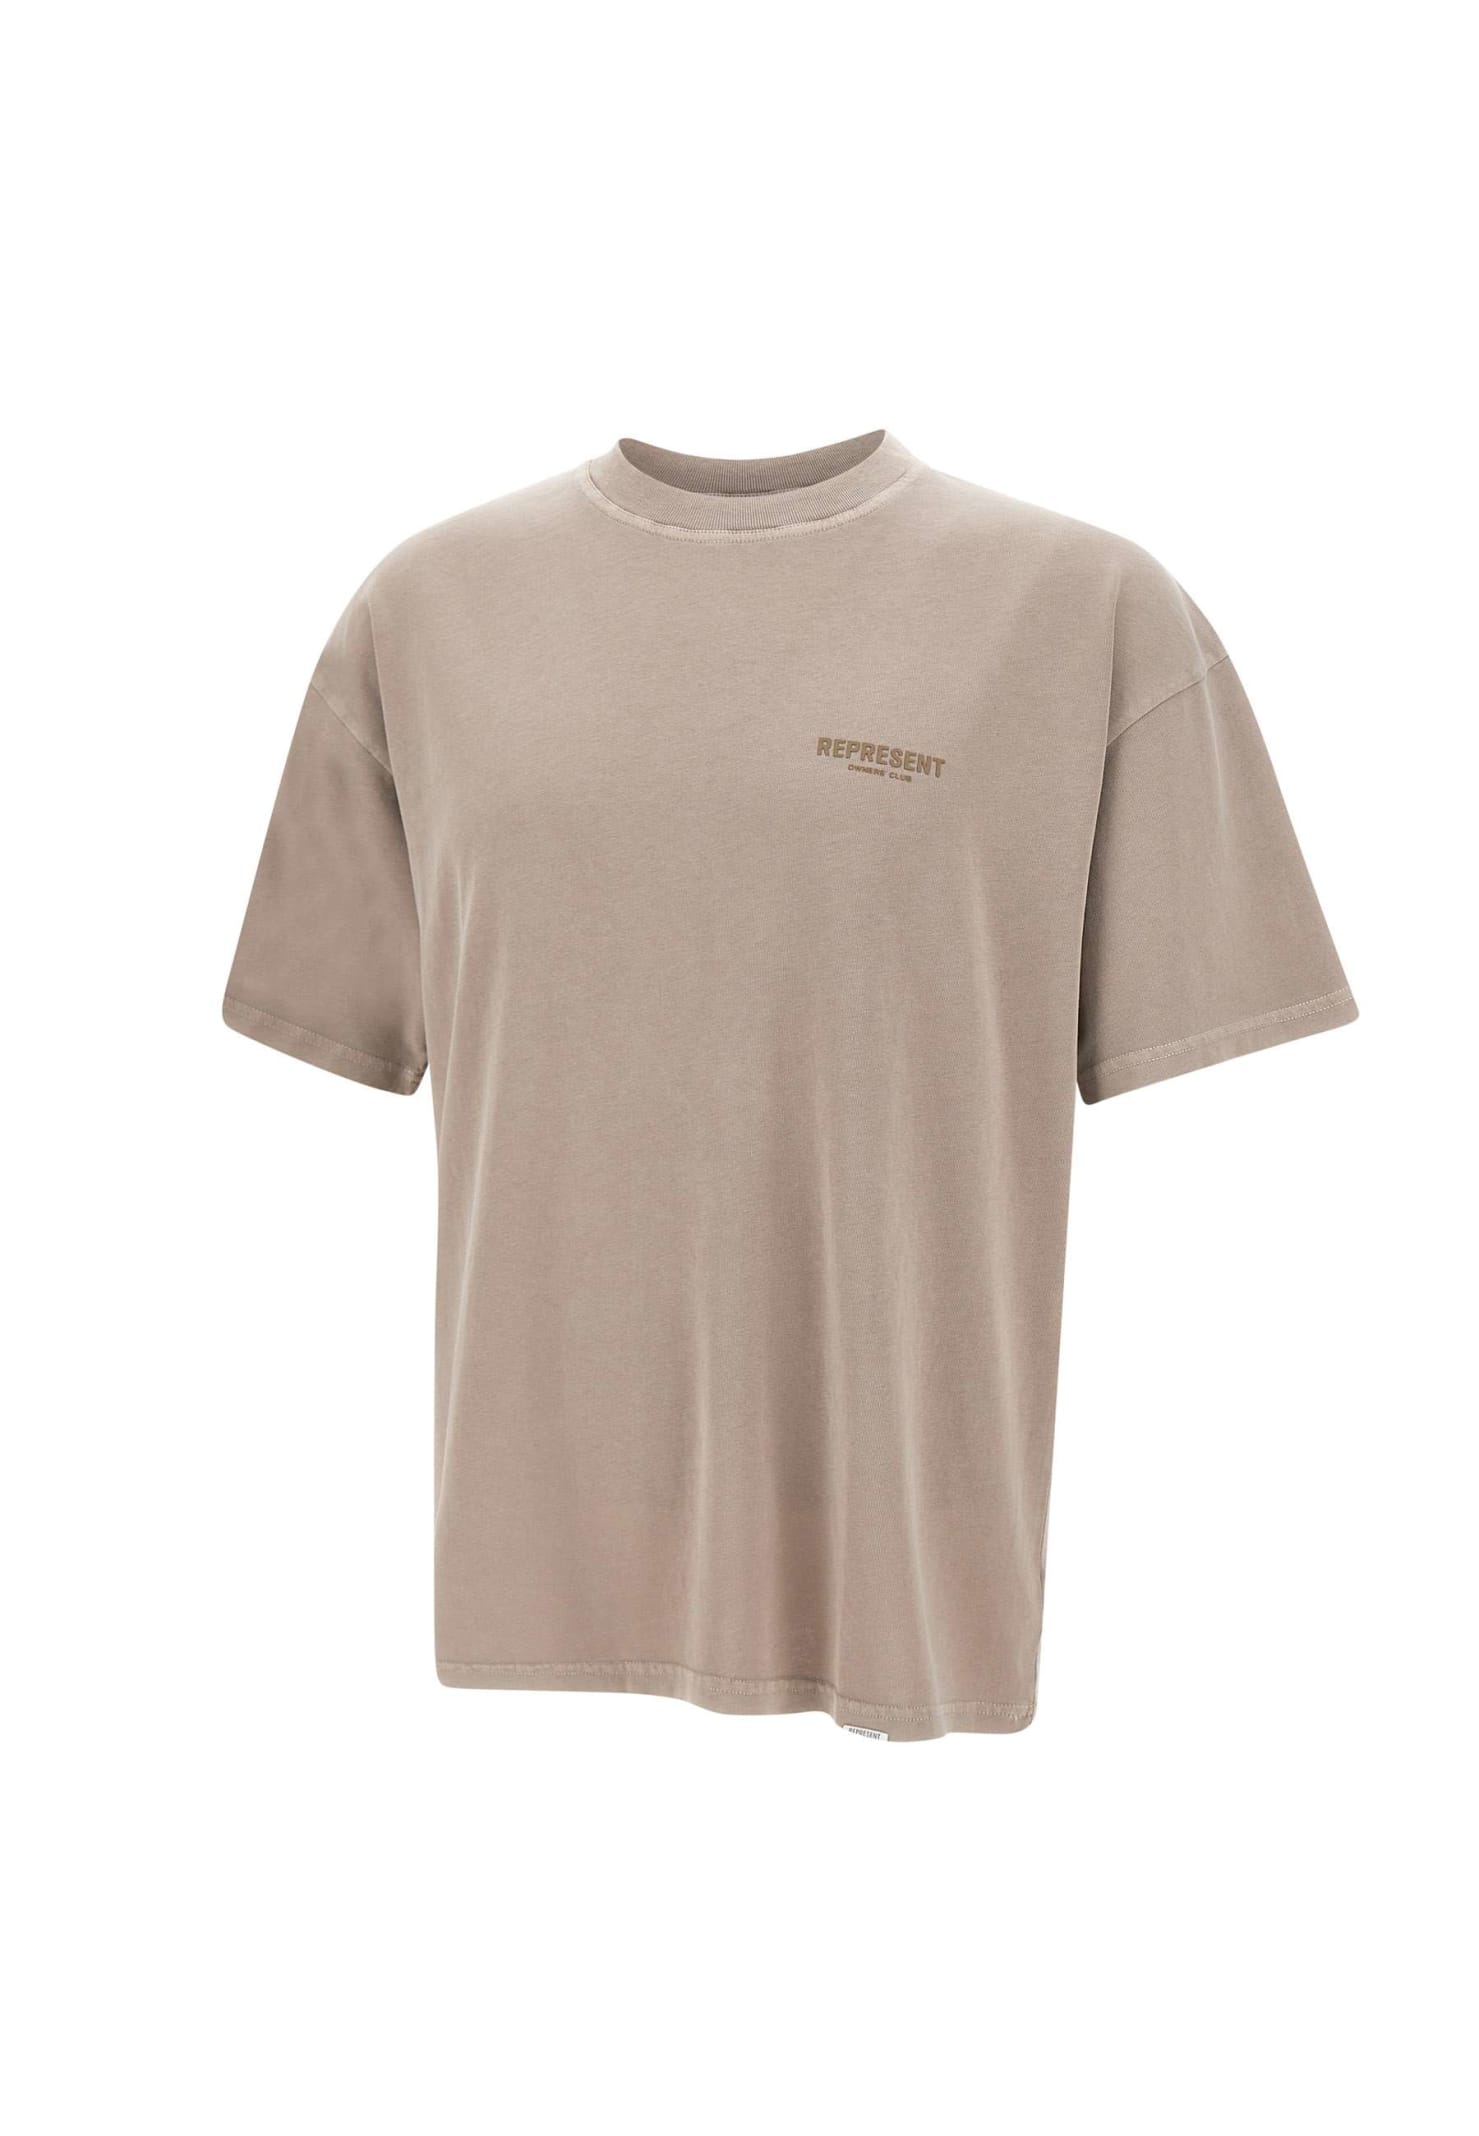 Shop Represent Owners Club Cotton T-shirt In Beige